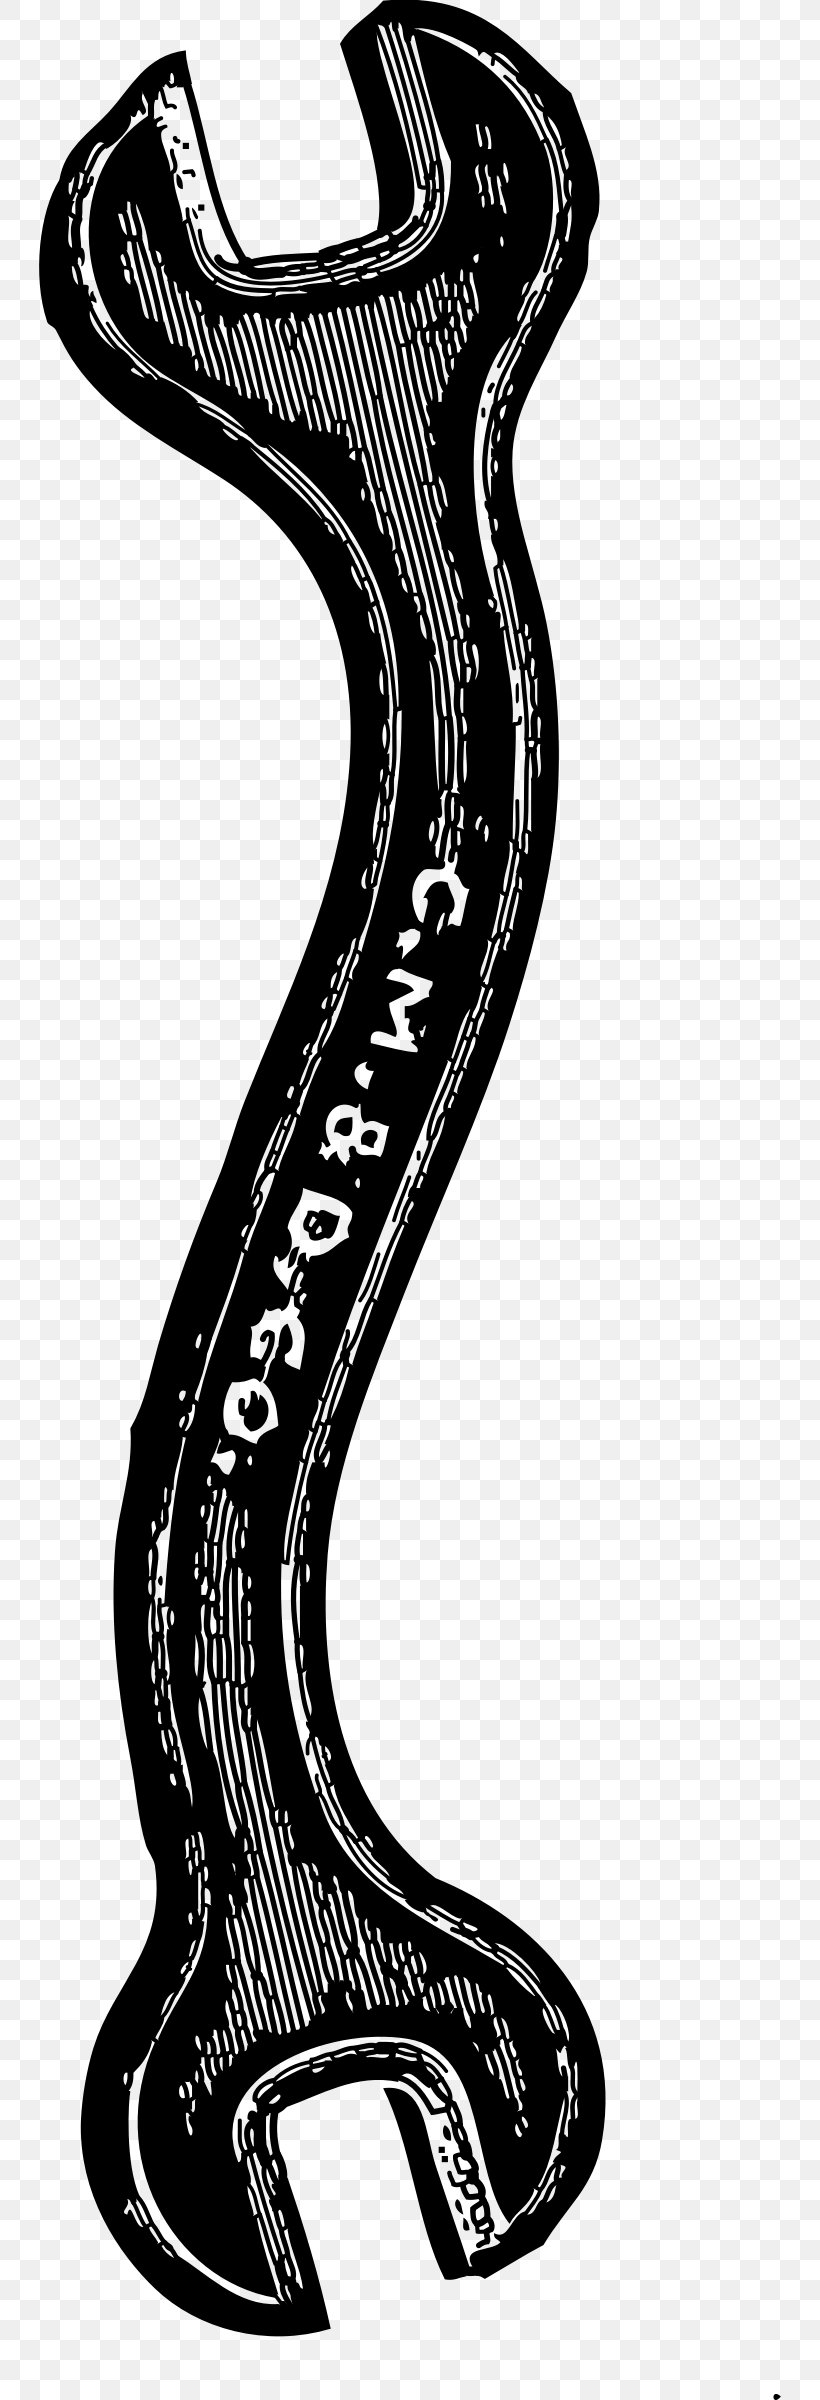 Spanners Adjustable Spanner Plumber Wrench Clip Art, PNG, 742x2400px, Spanners, Adjustable Spanner, Art, Black And White, Monkey Wrench Download Free